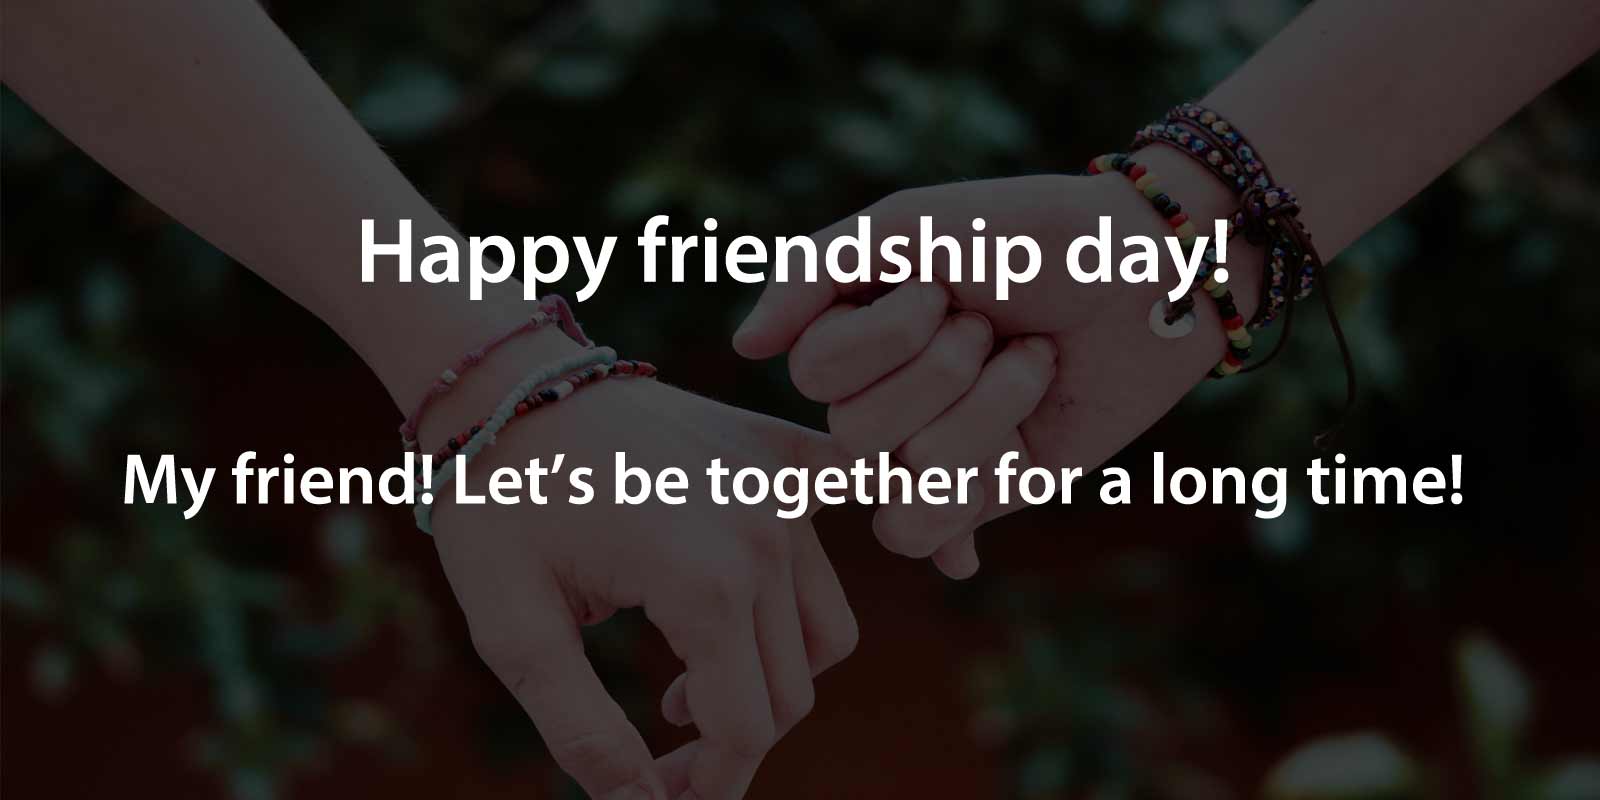 Friendship Day Wishes and Quotes - Well Quo